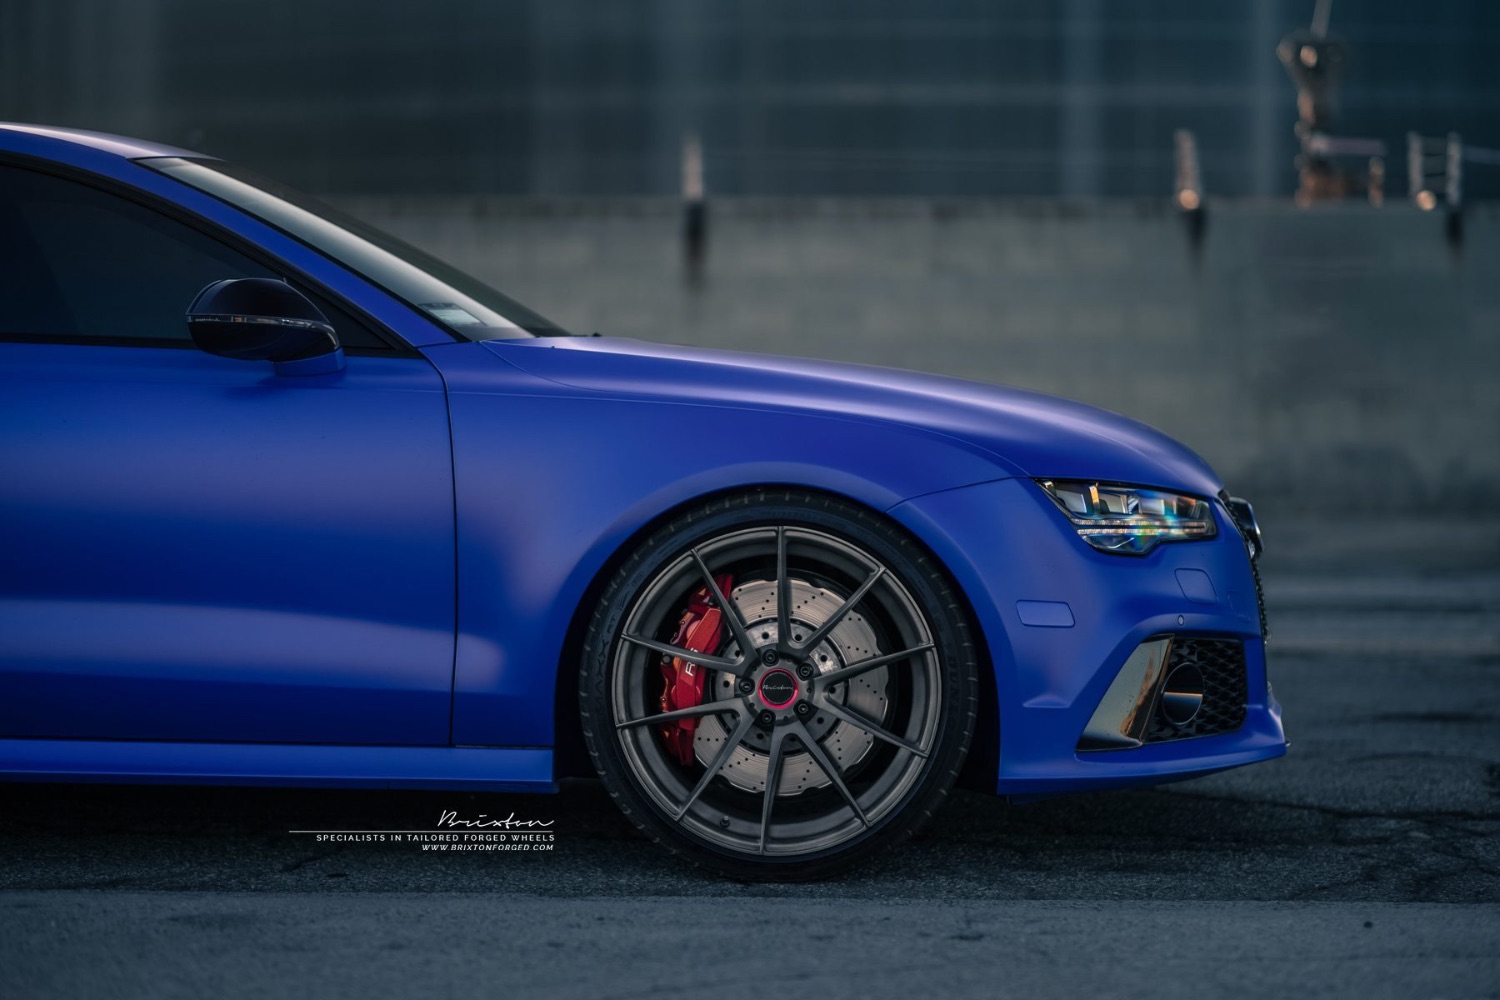 blue-audi-rs7-brixton-forged-wr3-ultrasport-1-piece-forged-wheels-21-inch-concave-smoke-black-10-1800x1200